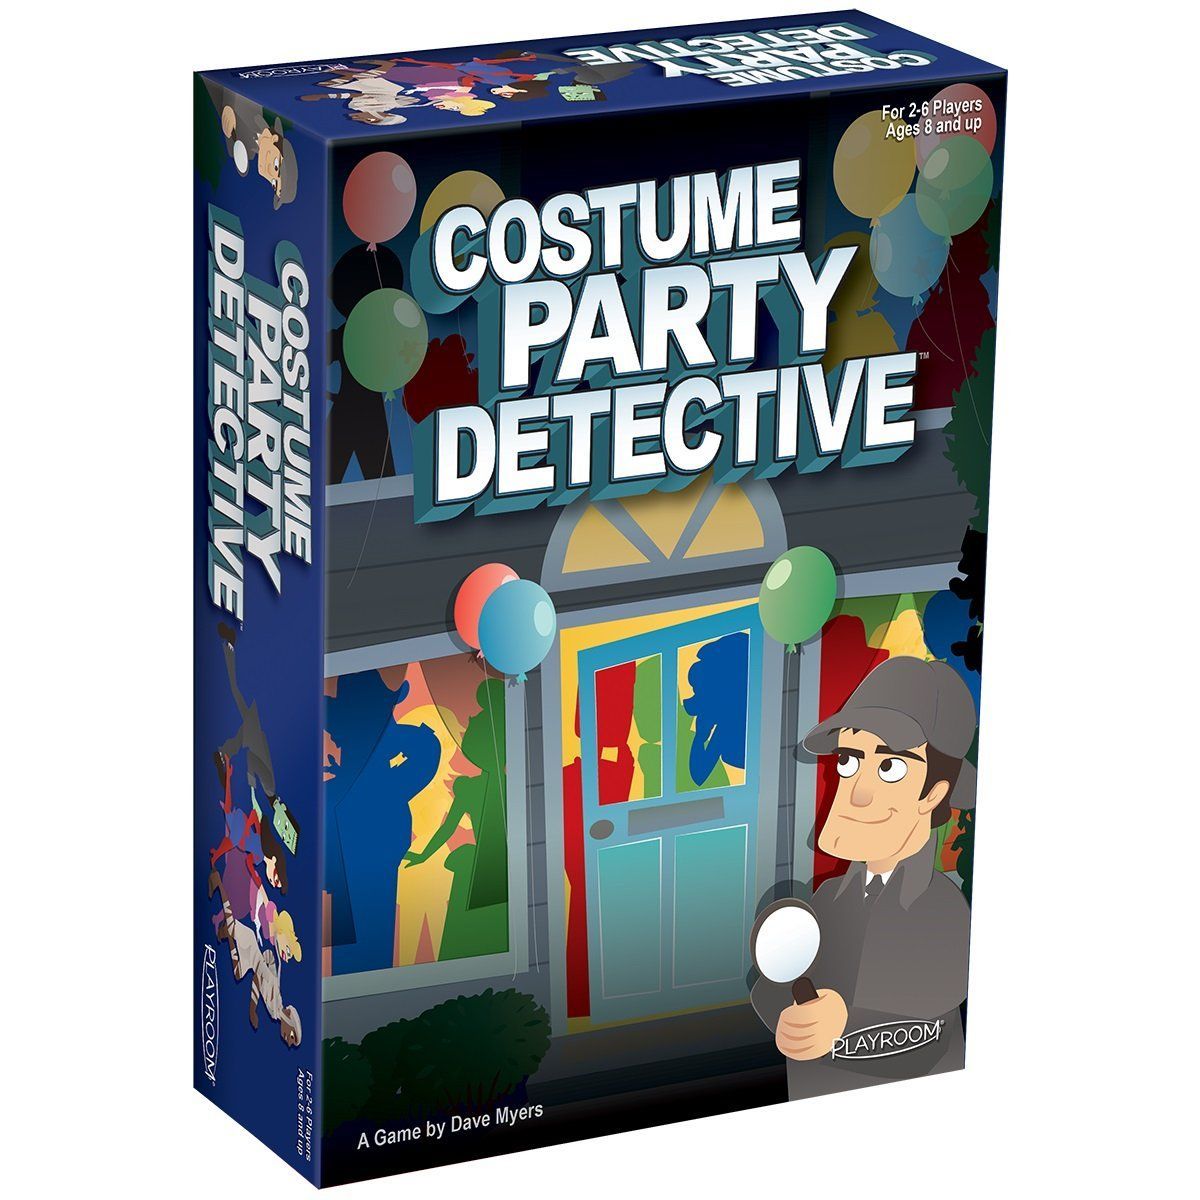 Costume Party Detective （密識派對）